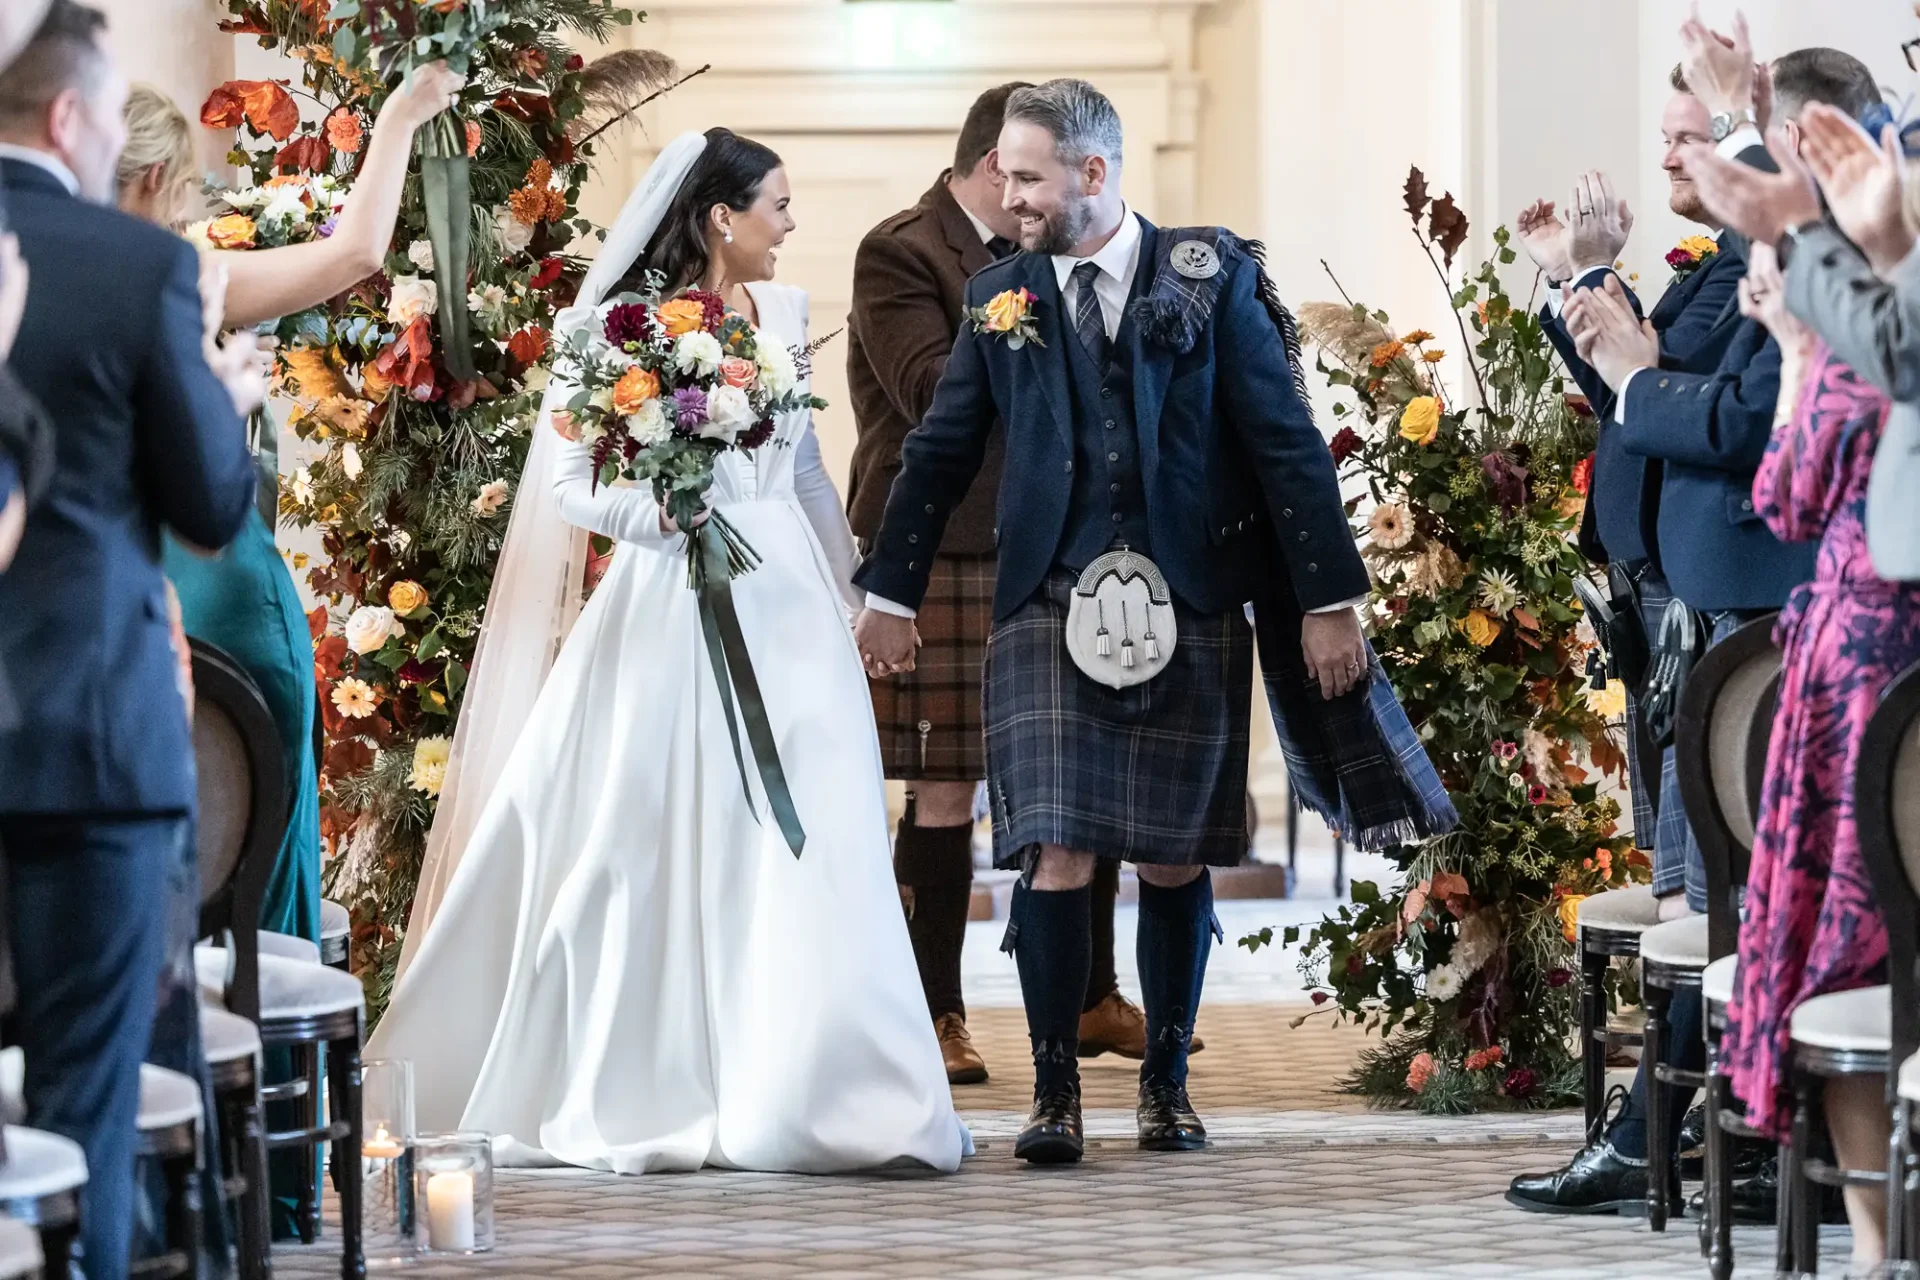 A newlywed couple walking down the aisle, receiving applause from guests, the bride in a white dress and the groom in a kilt.